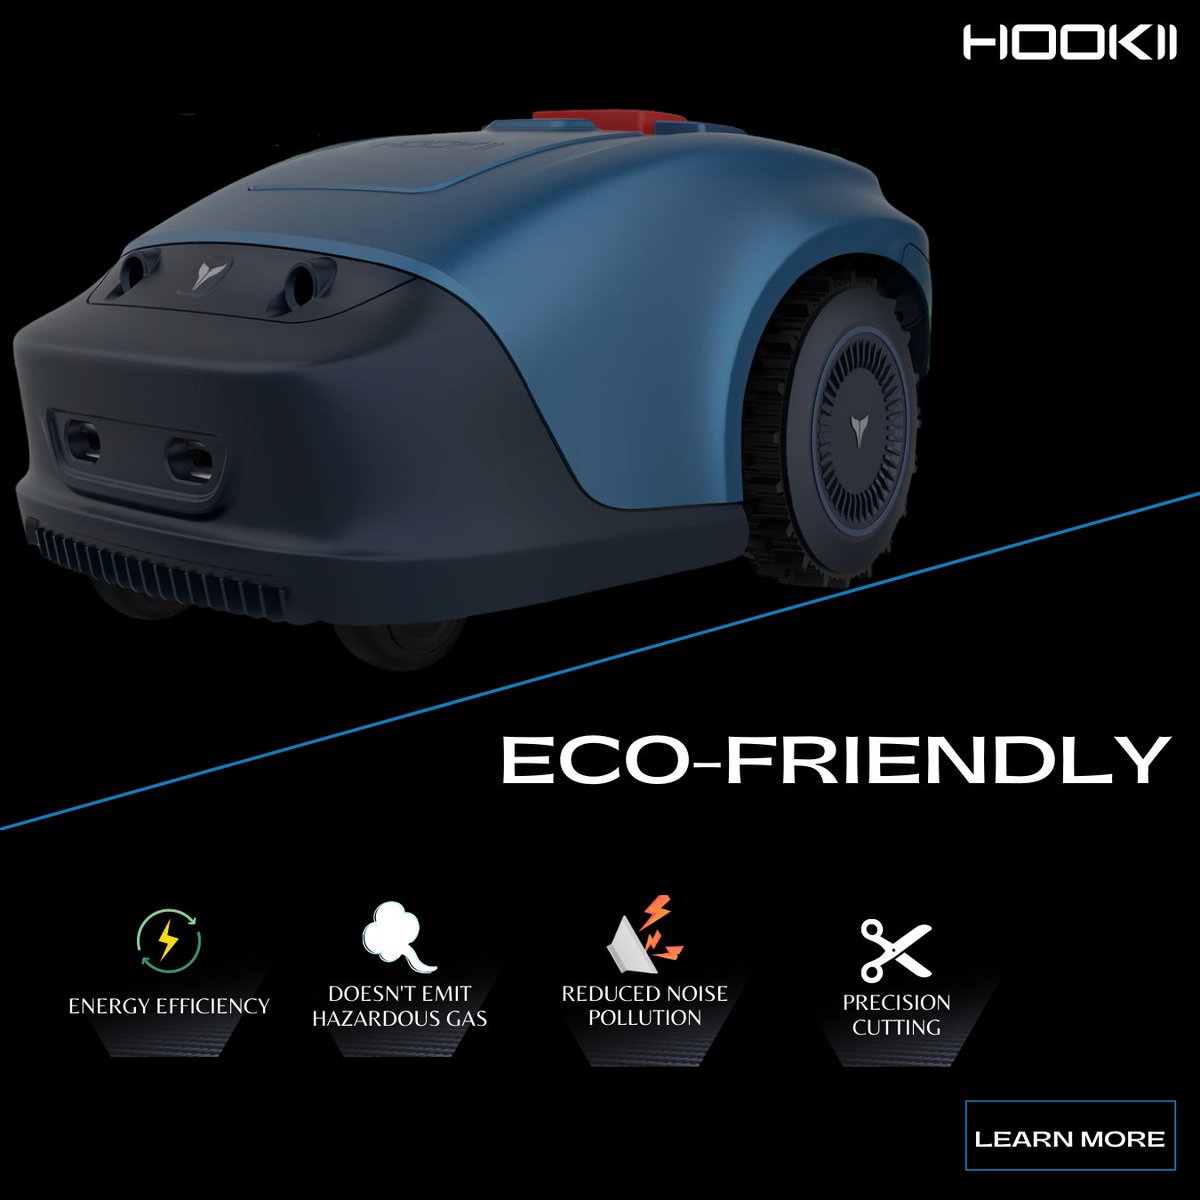 Neomow S is more environmentally friendly for several reasons：
#Hookii #neomow #robotmower #parallelmowing